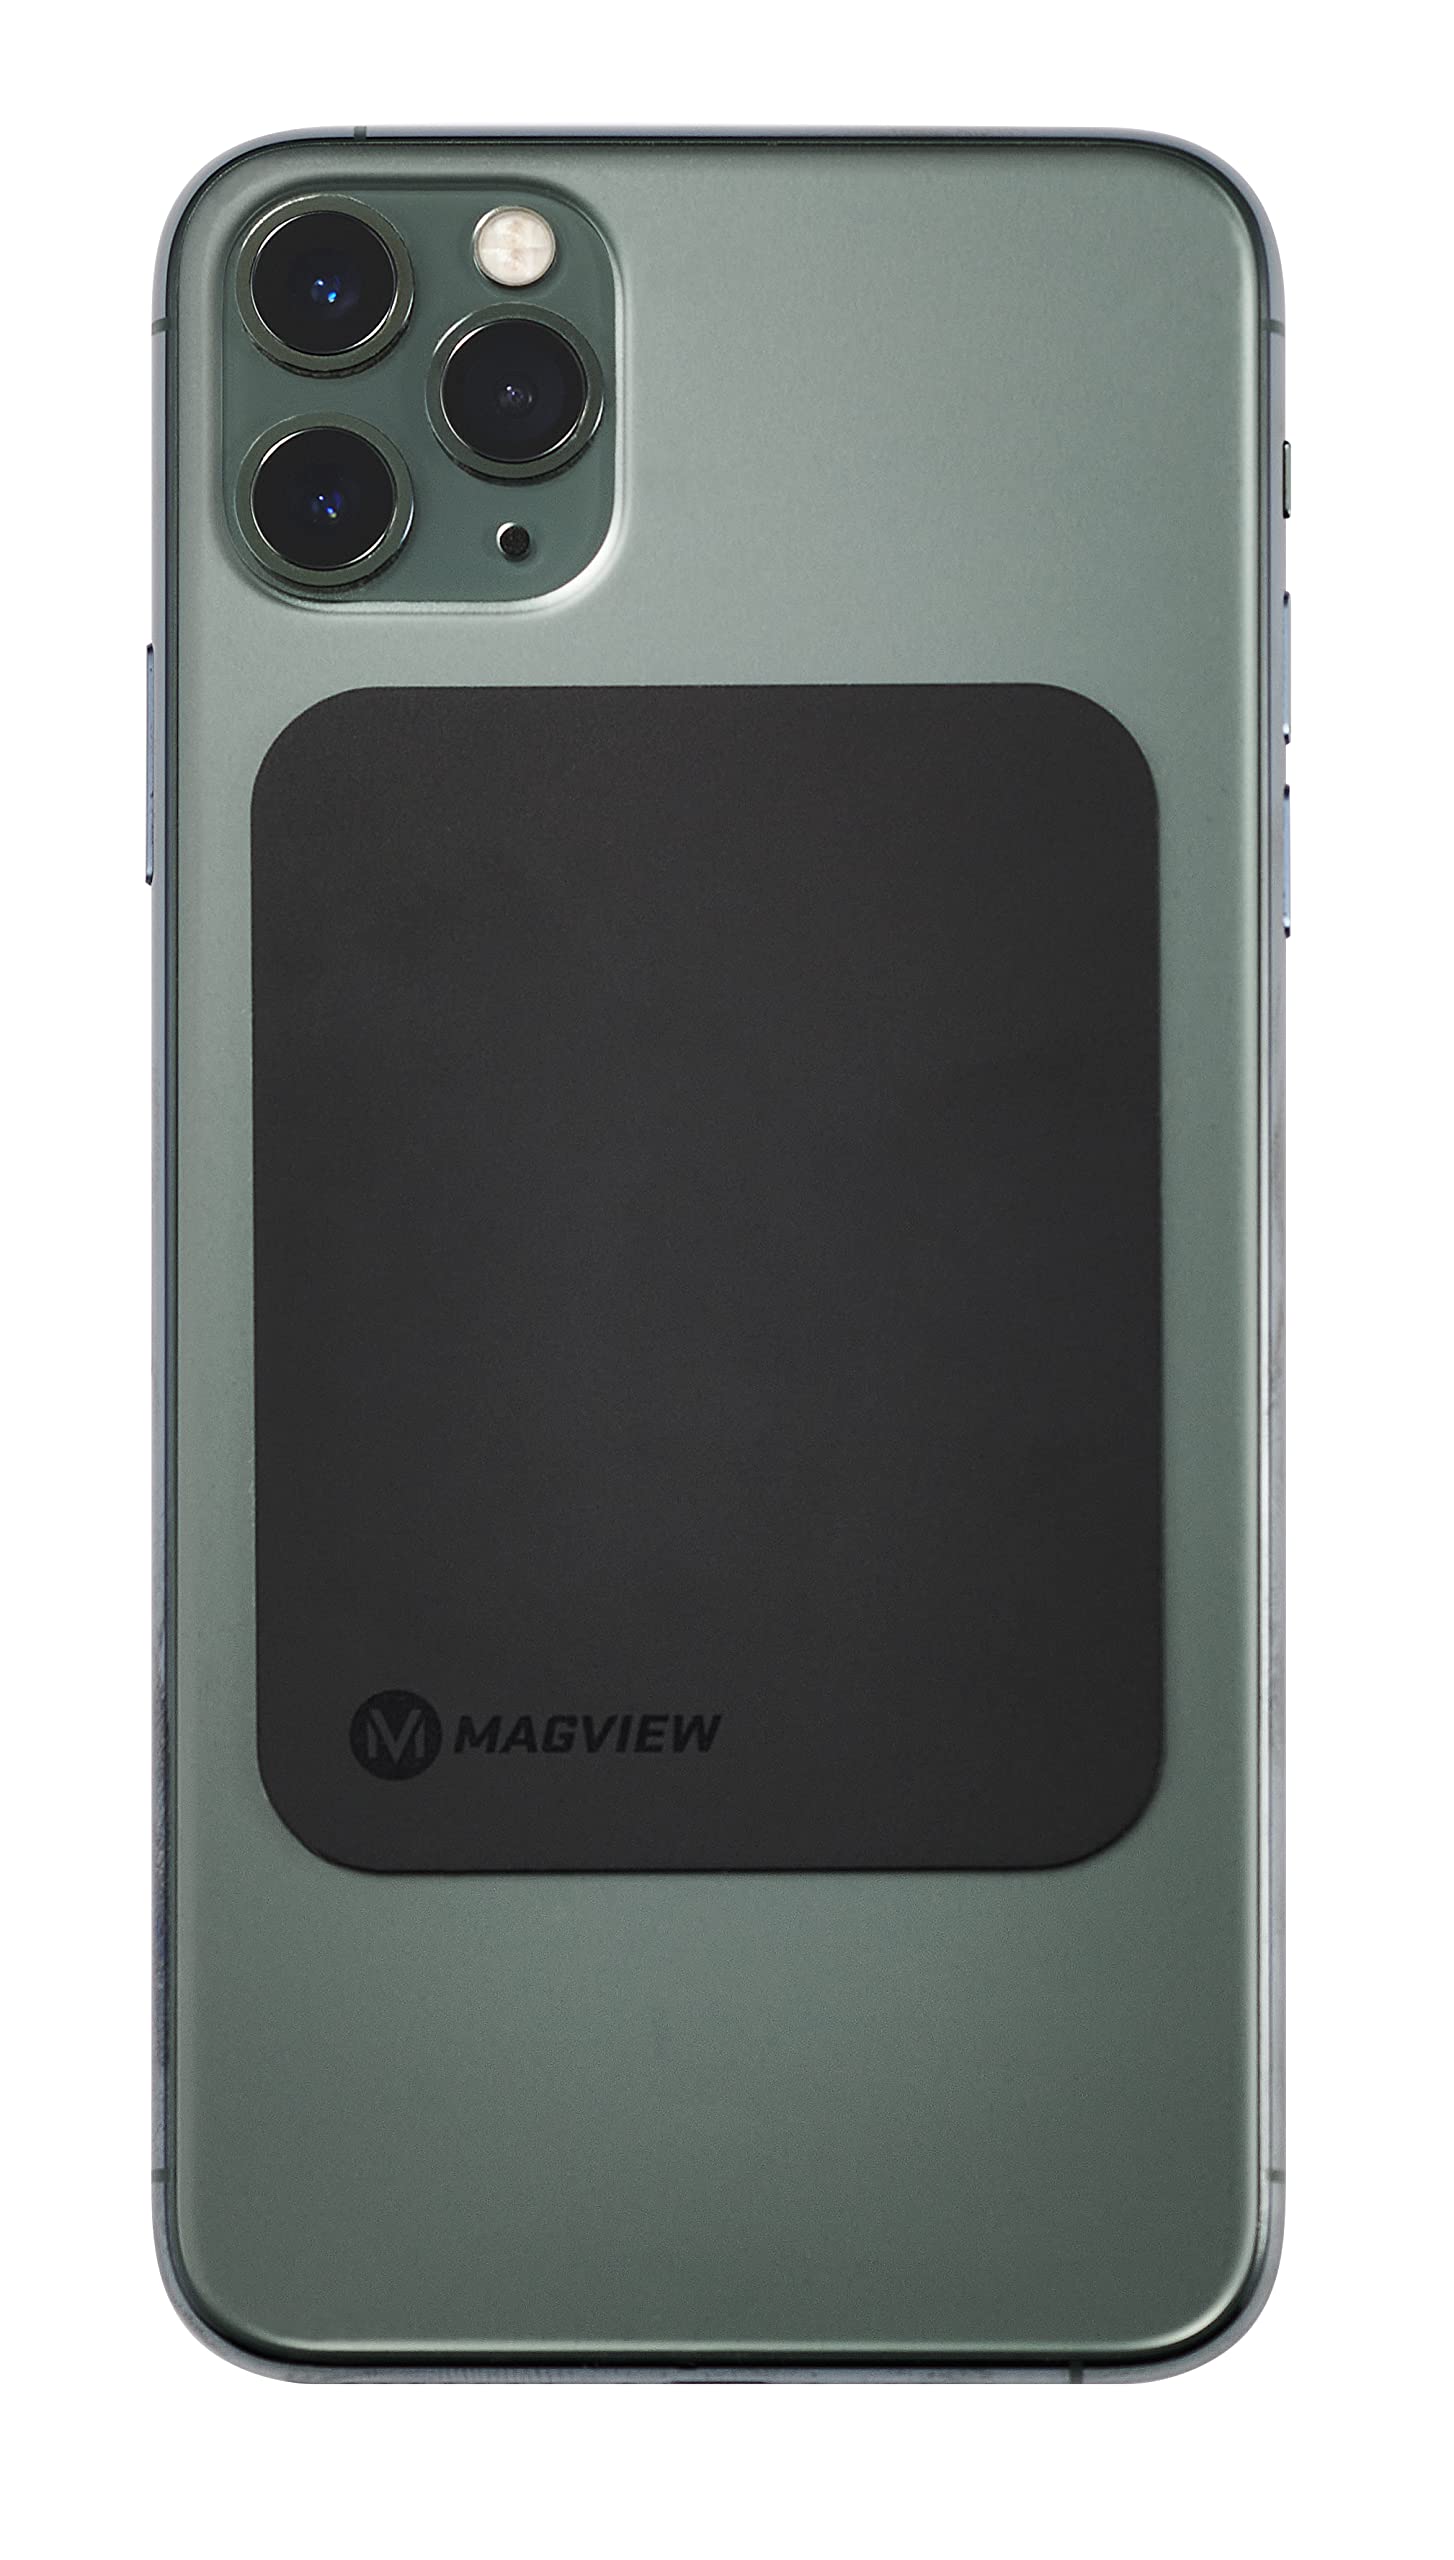 MAGVIEW Digiscoping S1 Spotting Scope Universal Phone Adapter